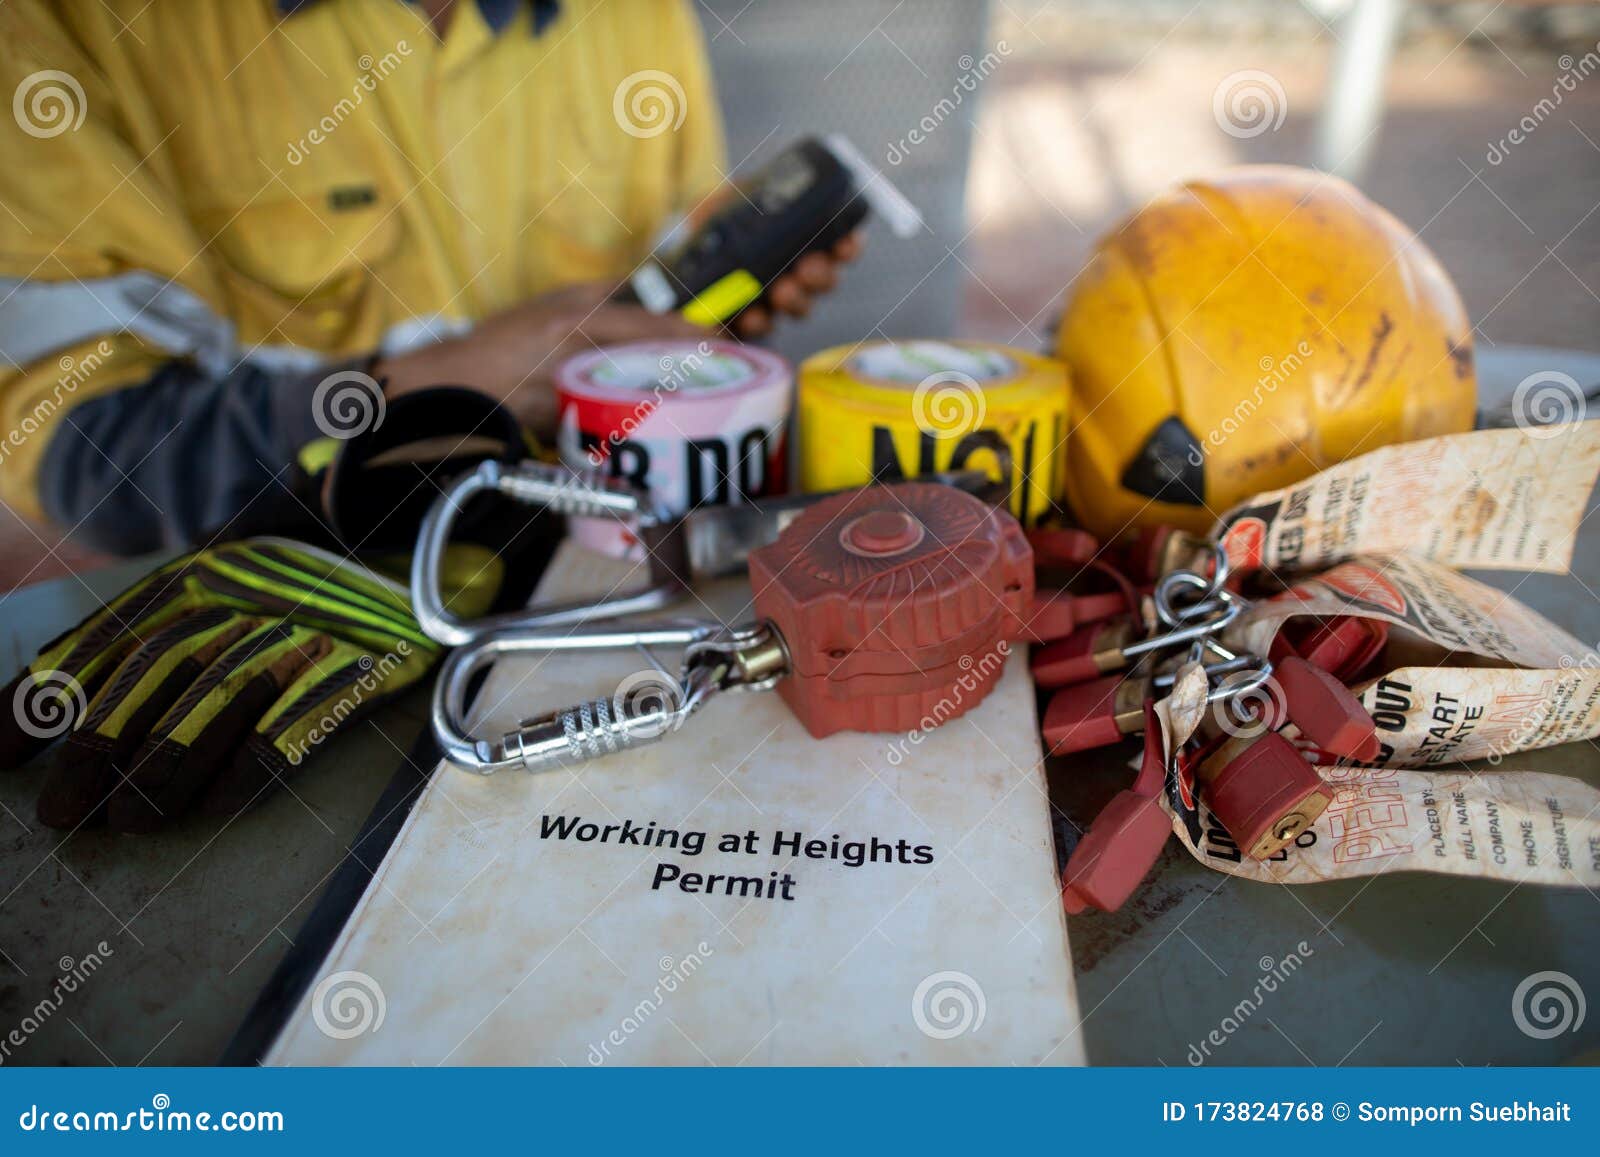 safety workplace working at heights permit book on the table defocused an inertia reel shock absorbing fall protection device